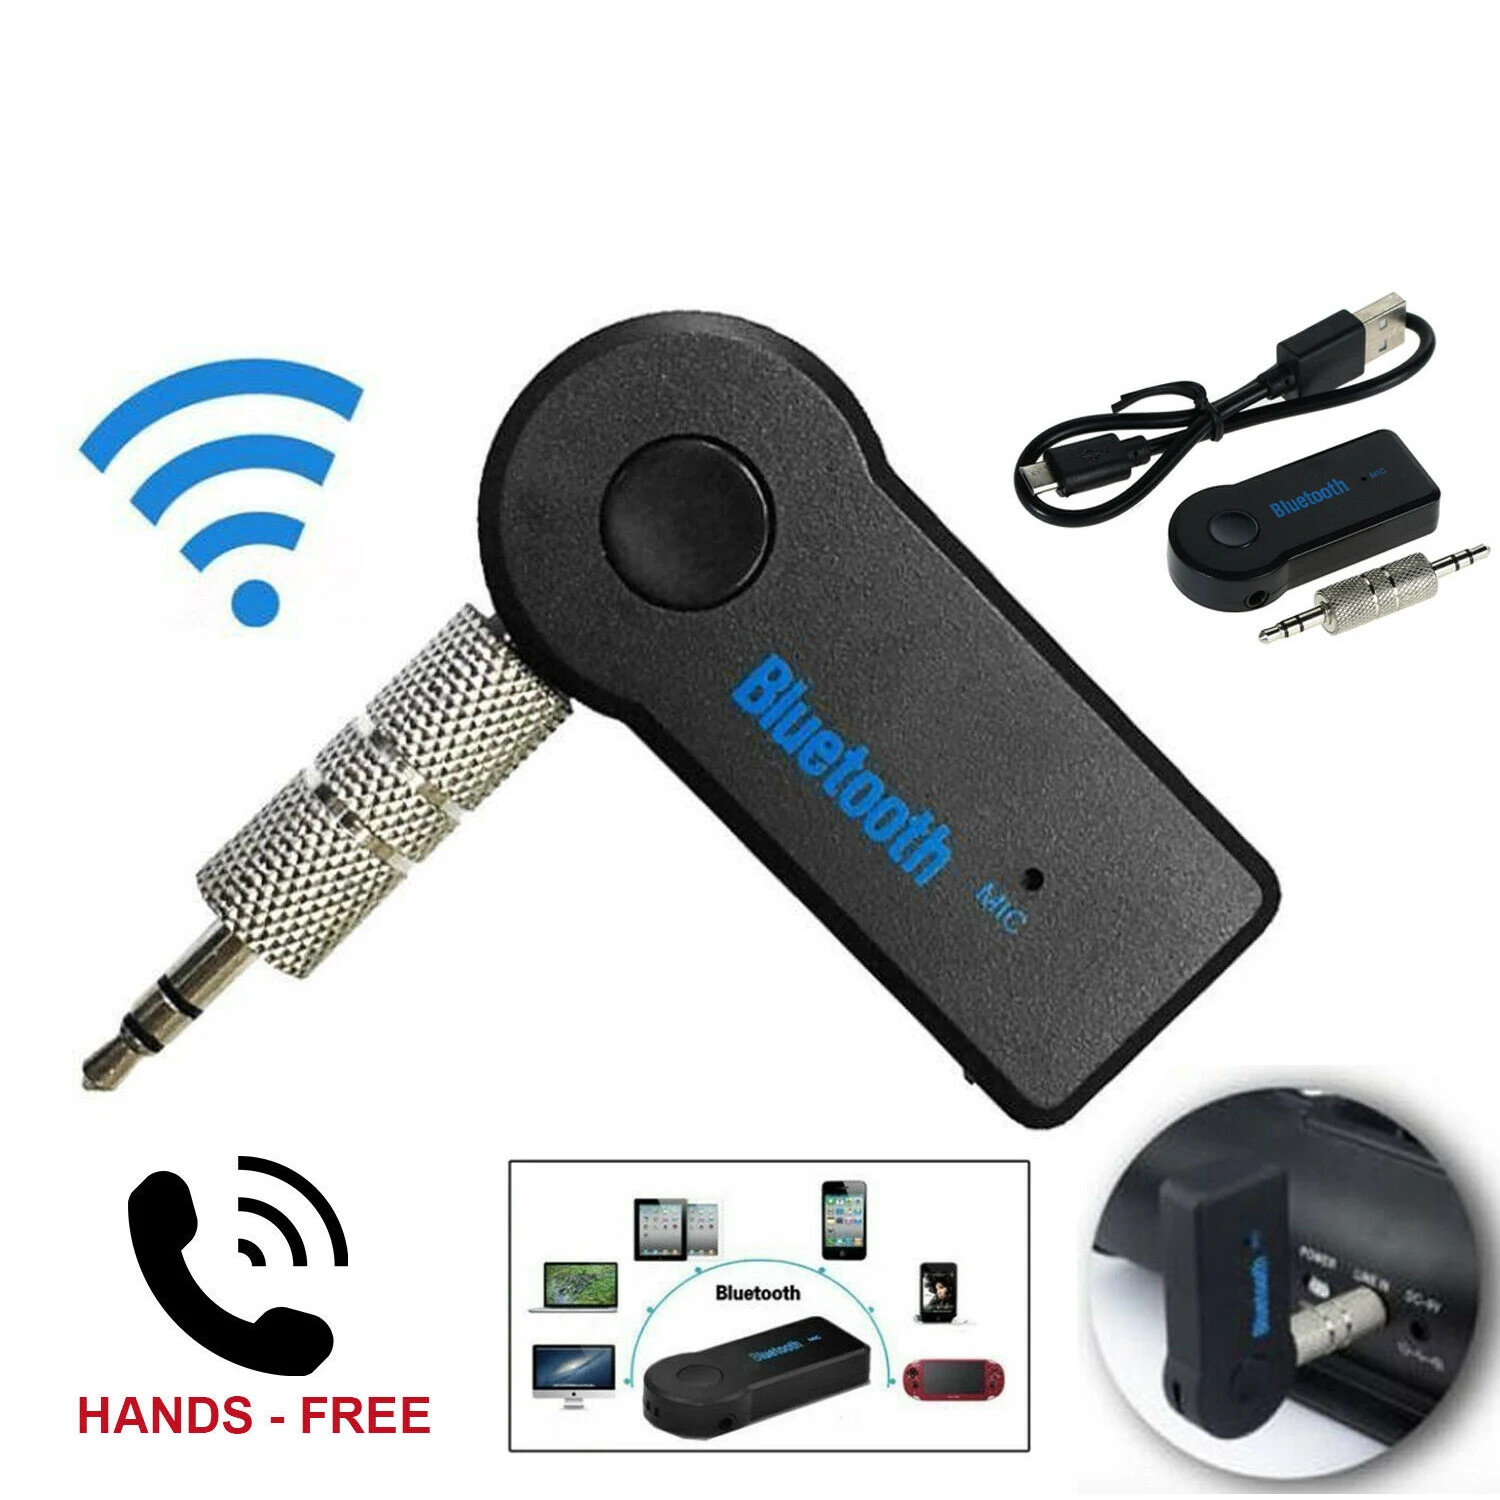 

Bluetooth 3.5mm AUX Audio Stereo Music Home Car Wireless Receiver Adapter Bluetooth Receiver Transmitter for PC LAPTOP WIN 7 10